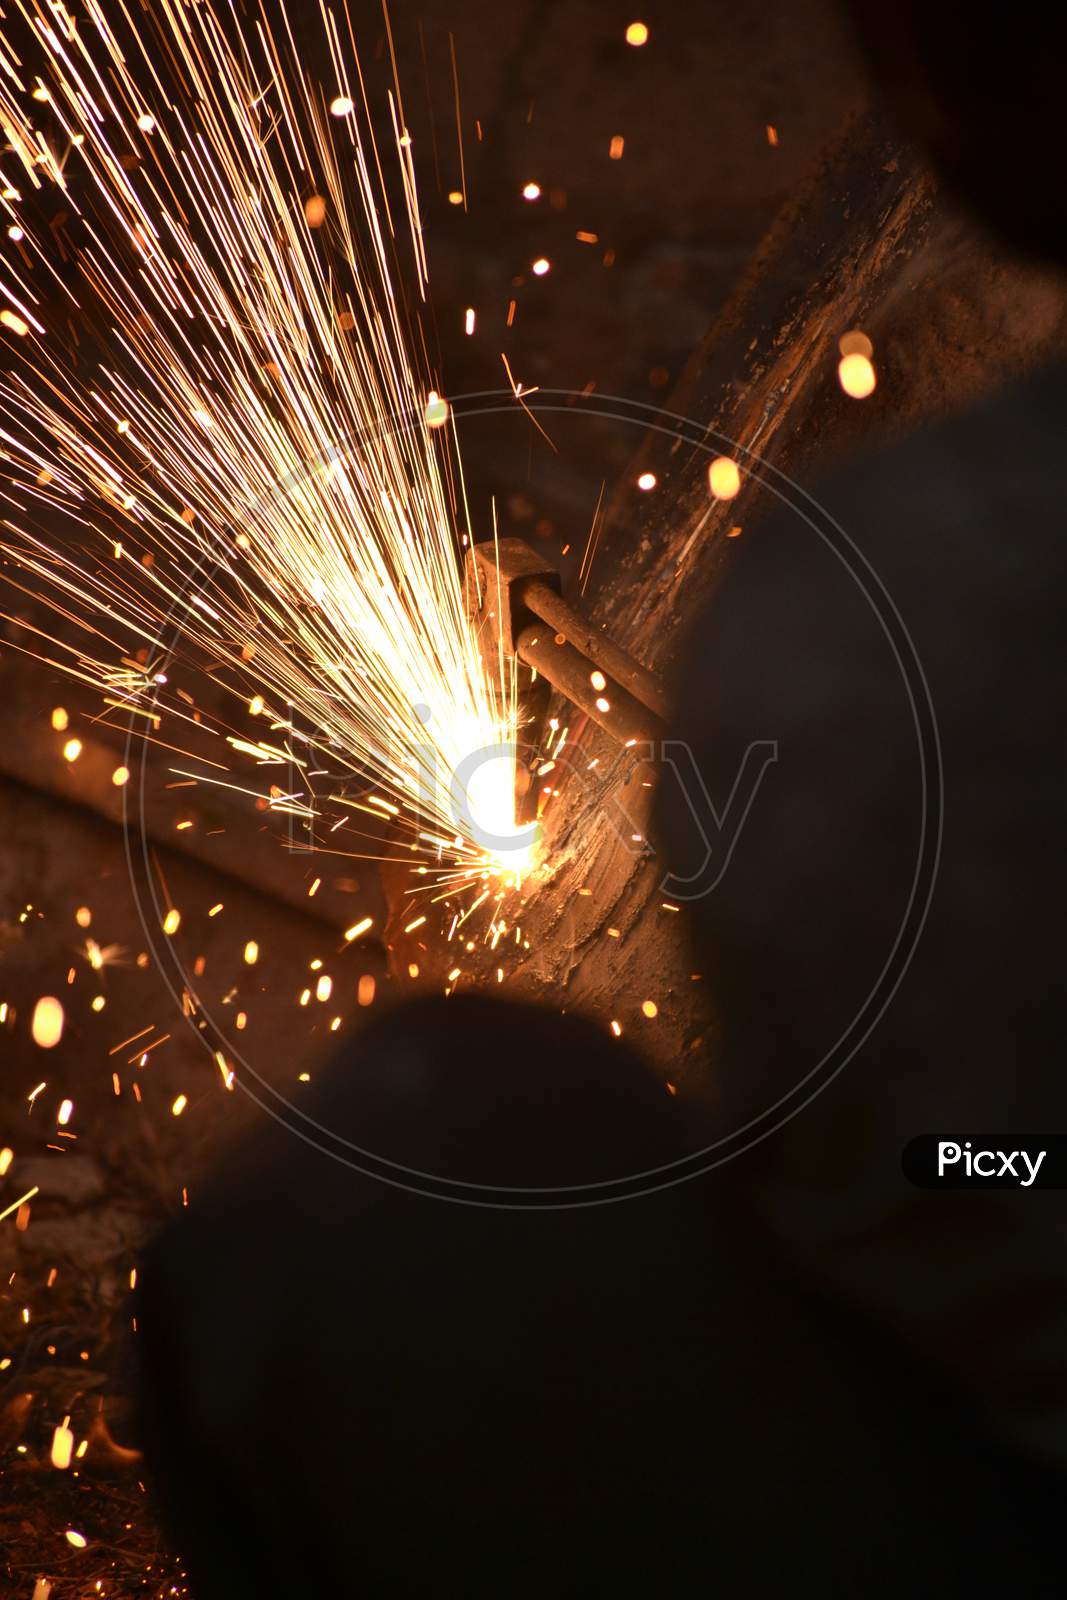 Fire Sparkles  During Metal Welding or Cutting